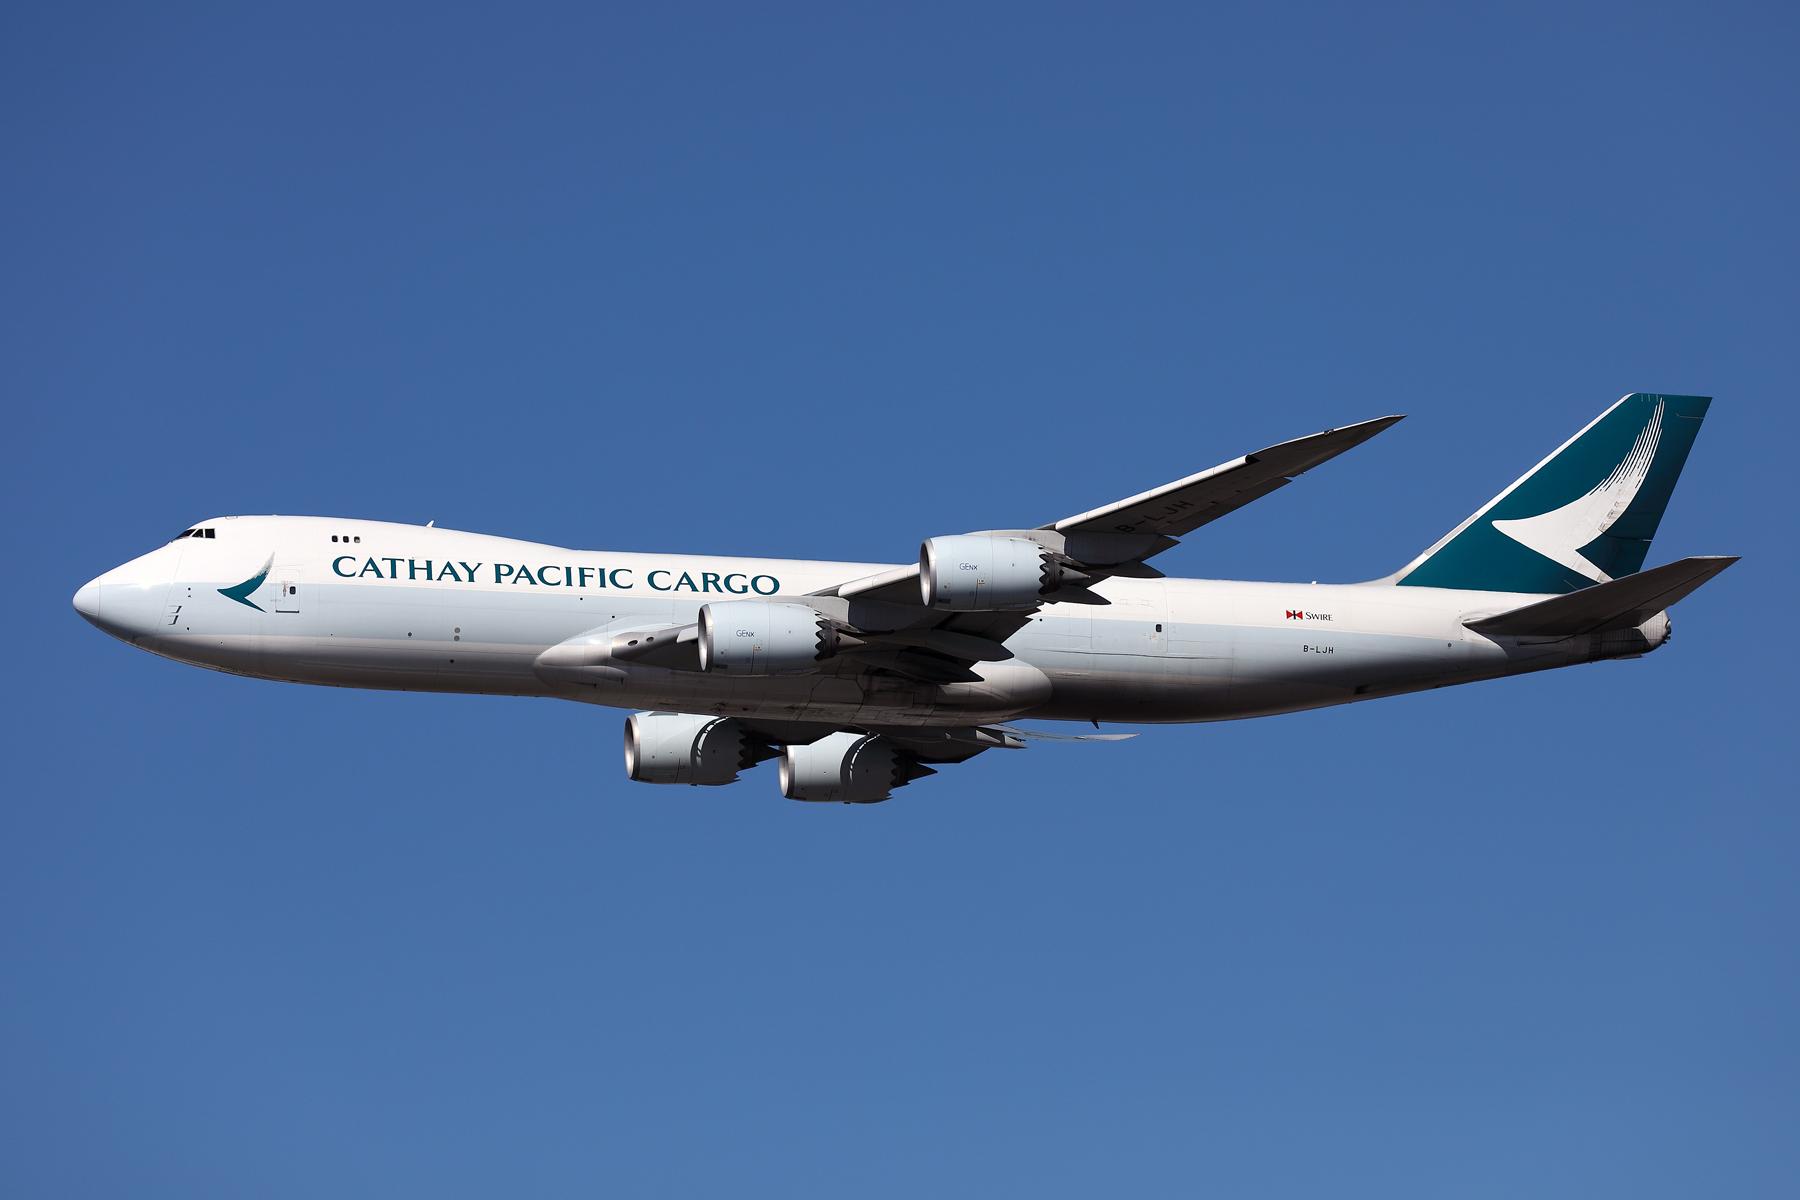 Cathay Pacific Cargo Boeing 747-800F